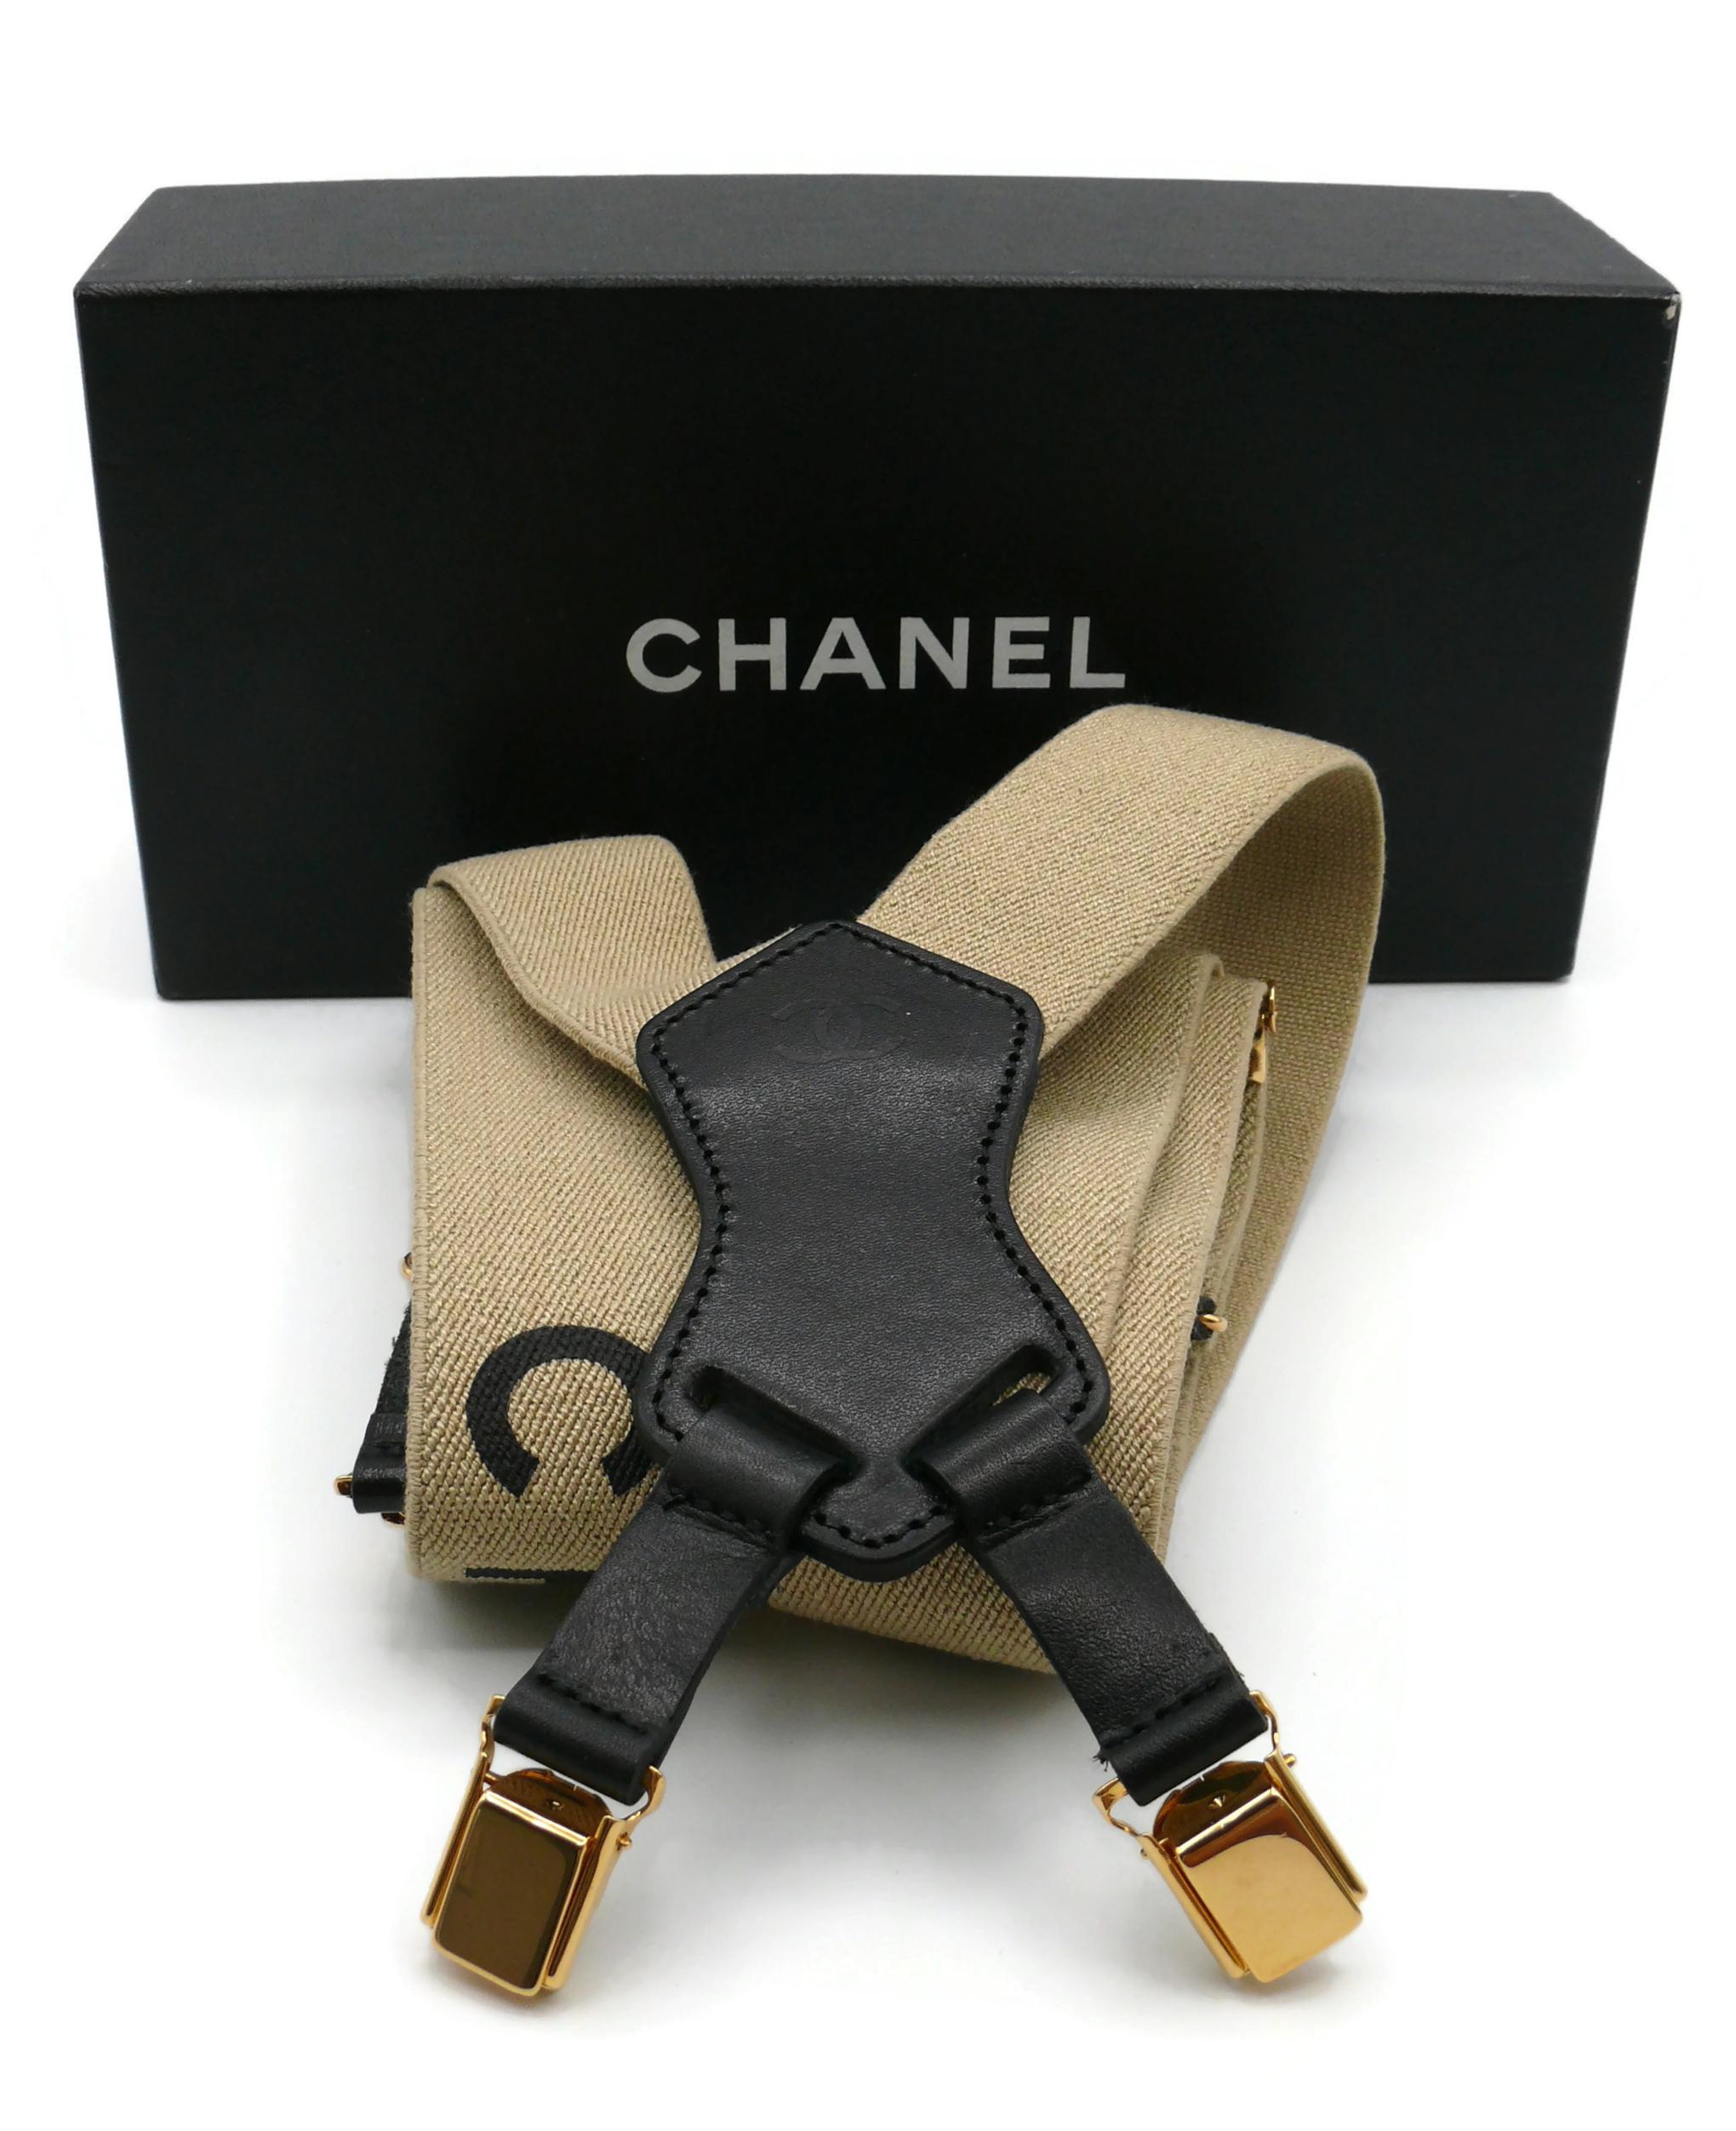 CHANEL by KARL LAGERFELD Vintage Iconic Light Brown and Black ...